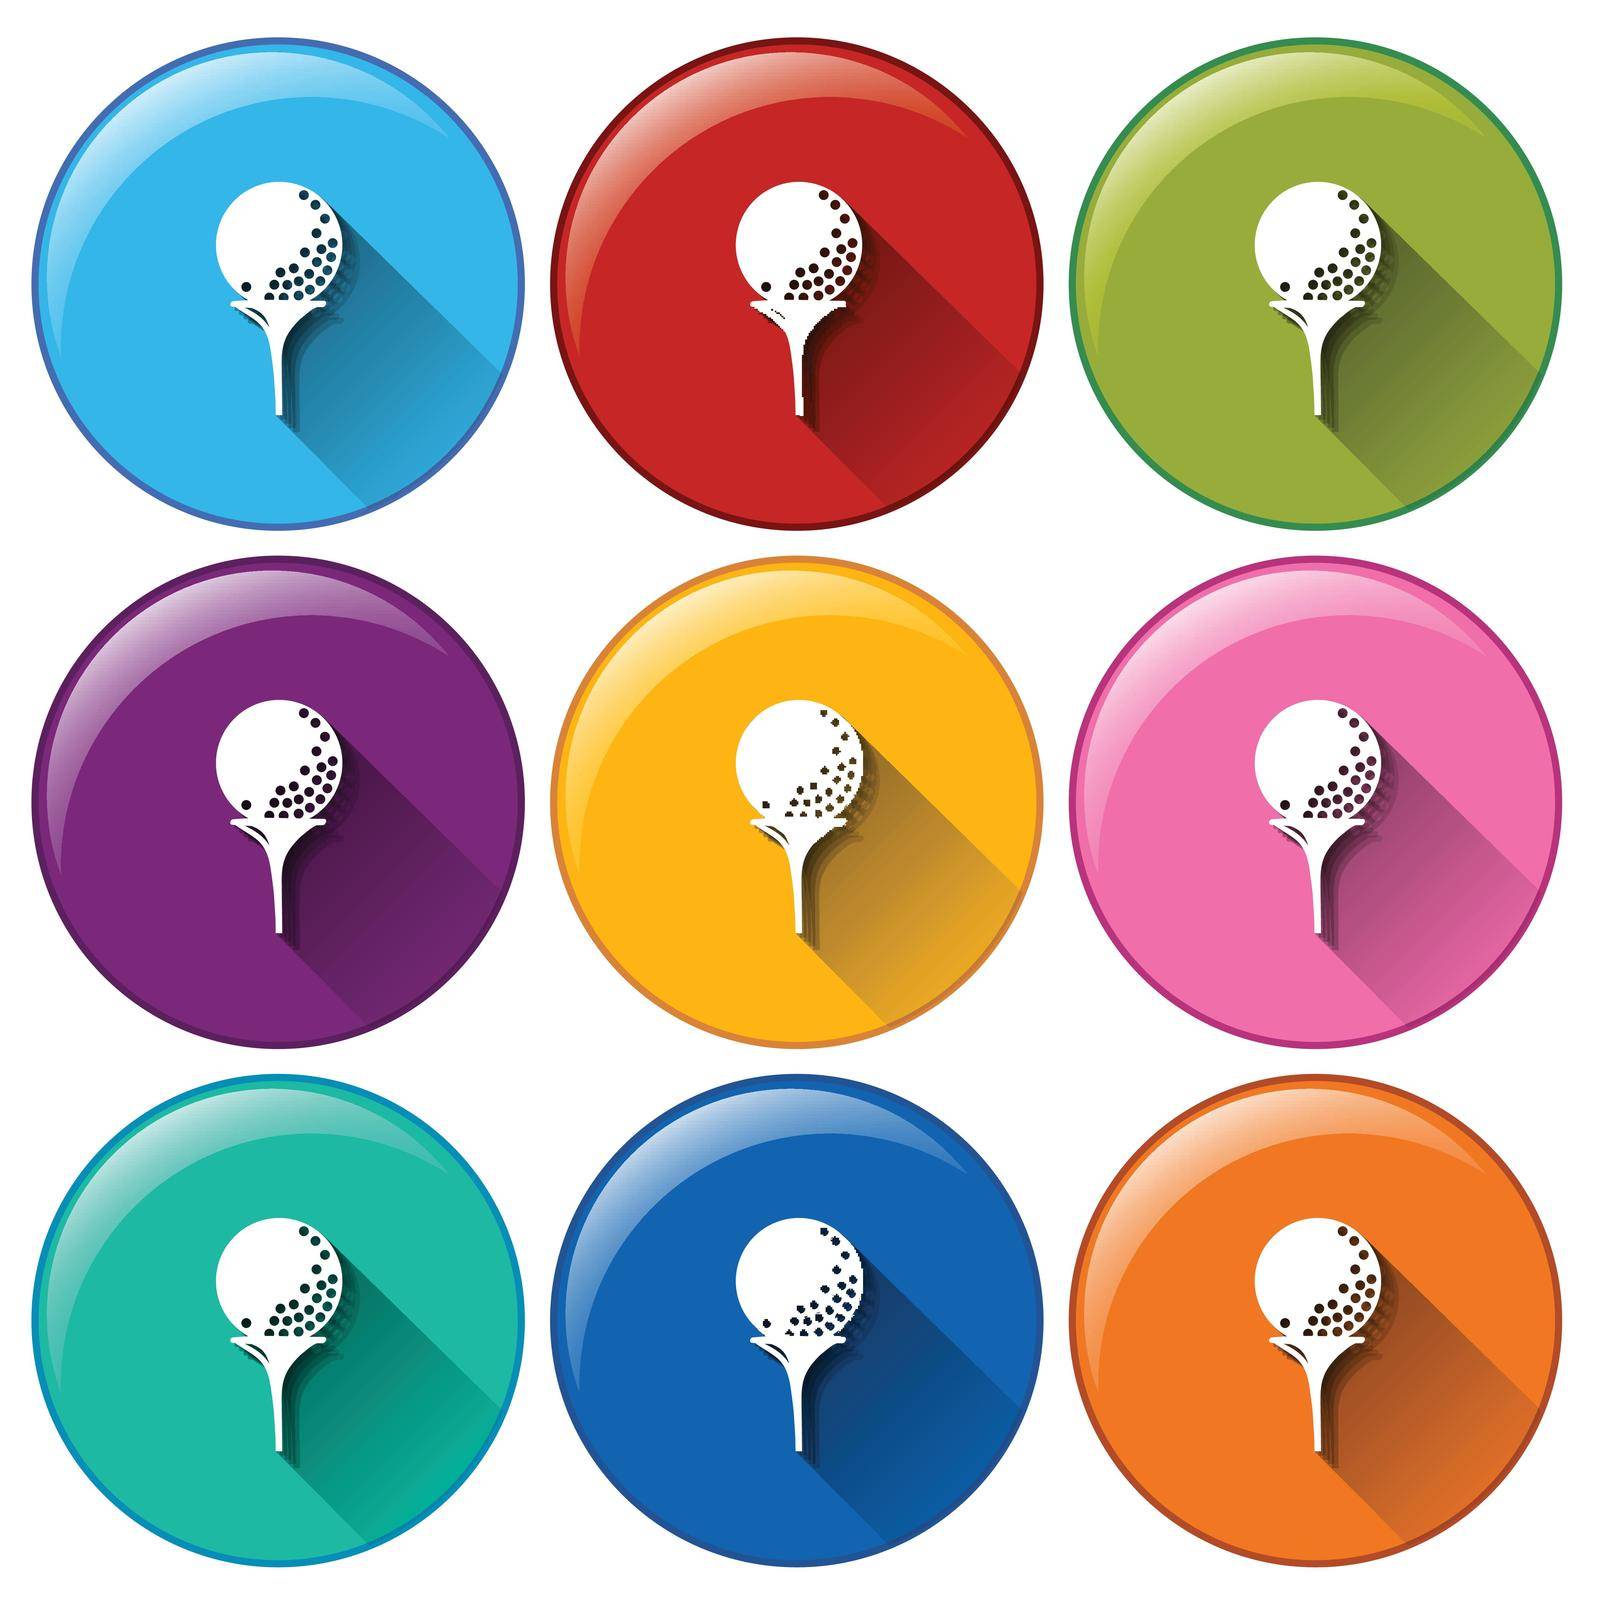 Illustration of a set of golf icons